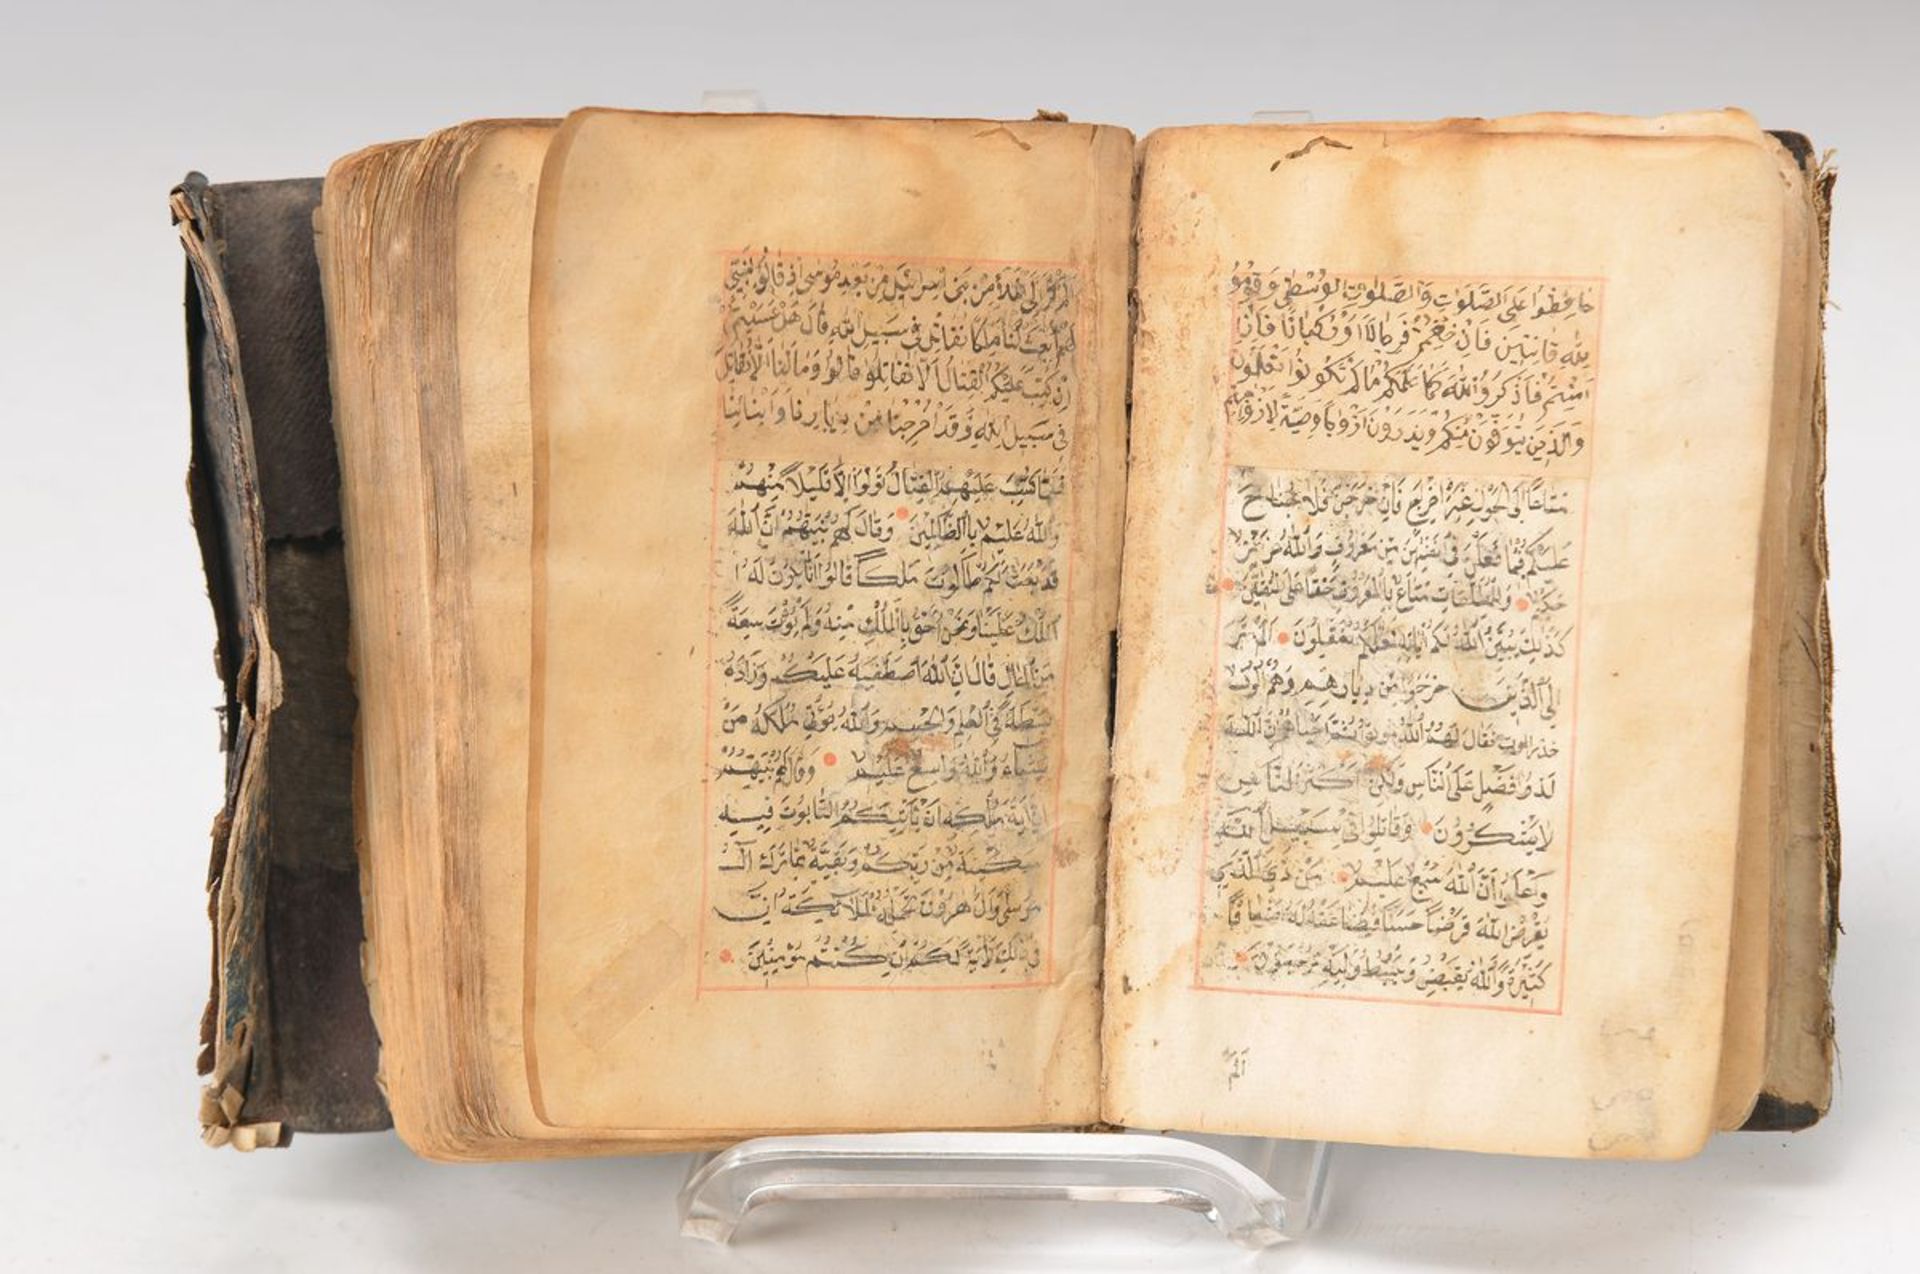 Quran, probably 19th c .., hand written, leather binding, partly with blurring, traces of tapping,